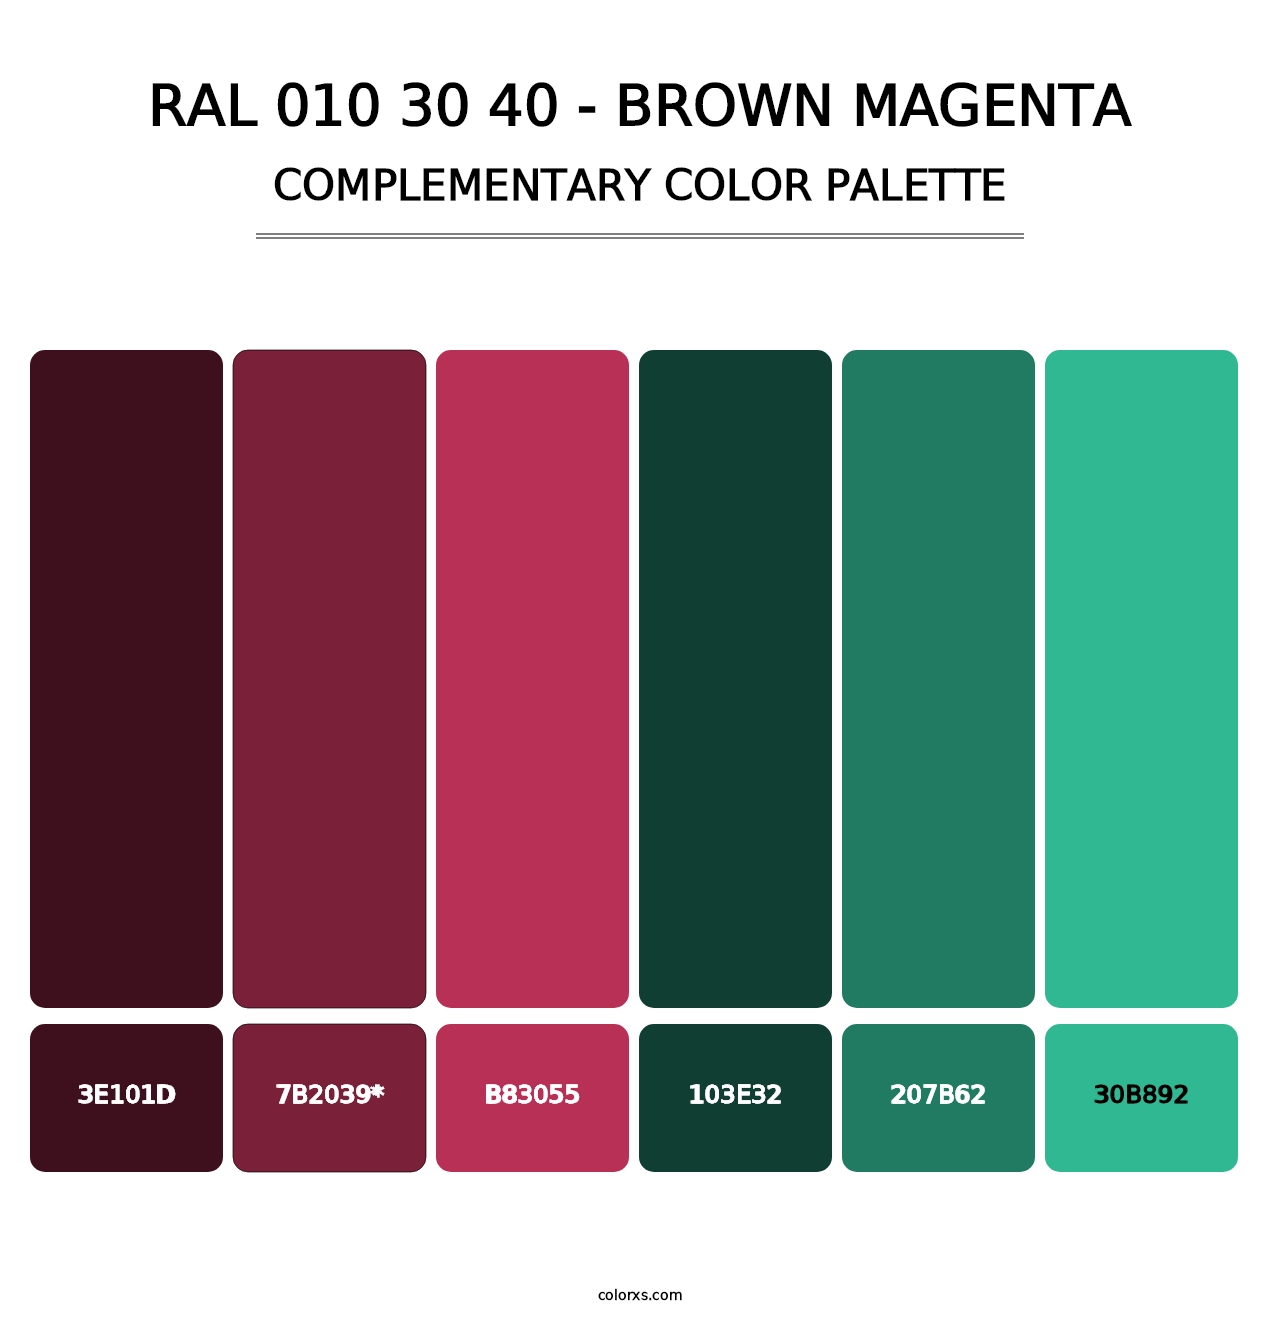 RAL 010 30 40 - Brown Magenta - Complementary Color Palette